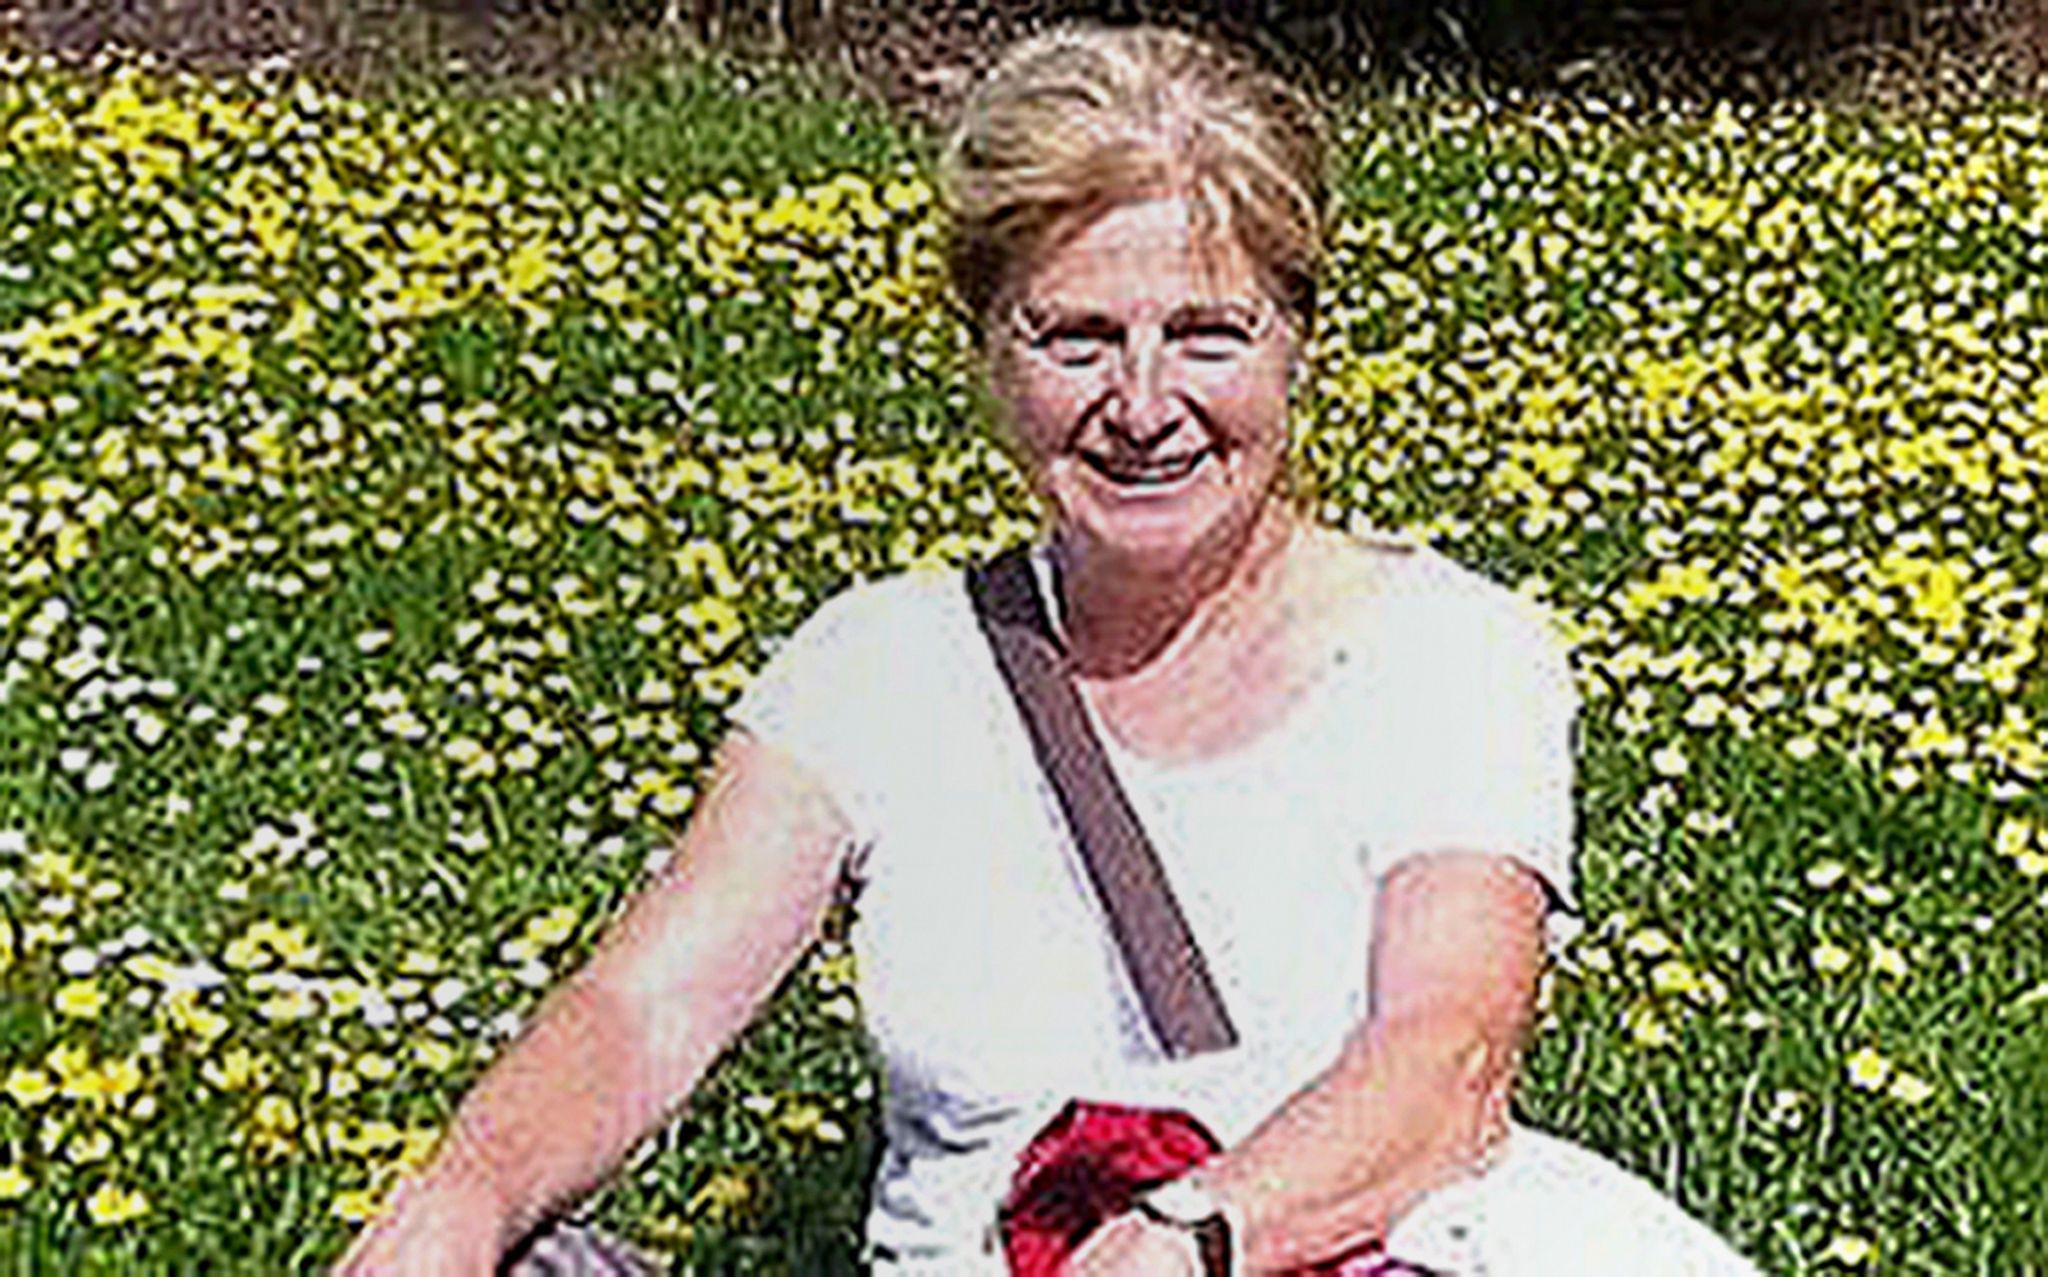 Danielle Carr-Gomm pictured wearing a white t-shirt, sat on the ground amongst lots of yellow flowers. 